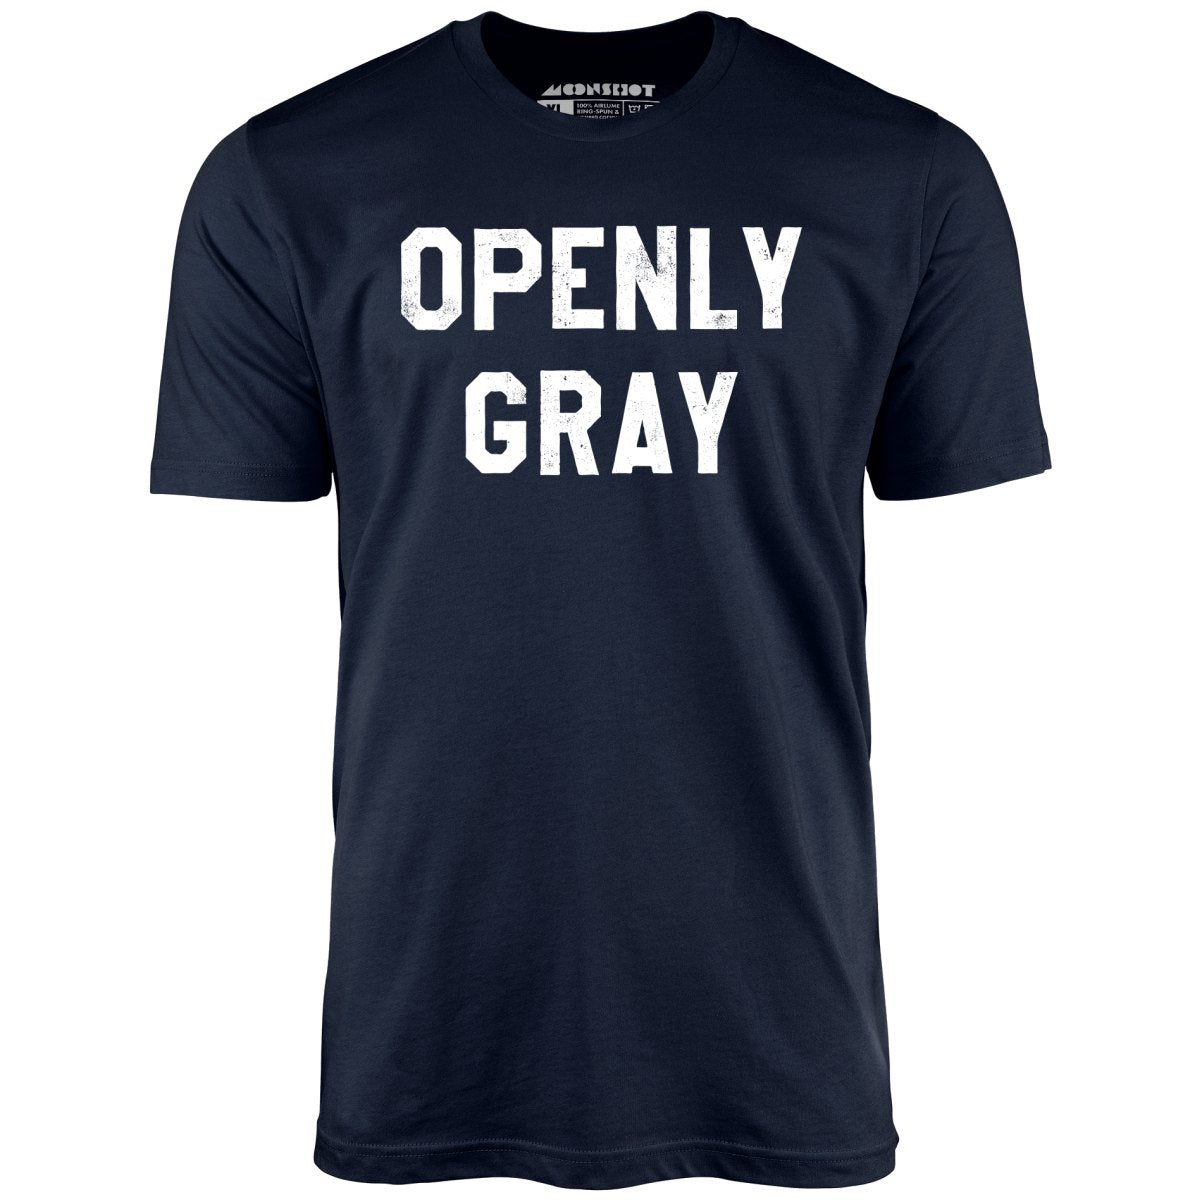 Openly Gray - Unisex T-Shirt